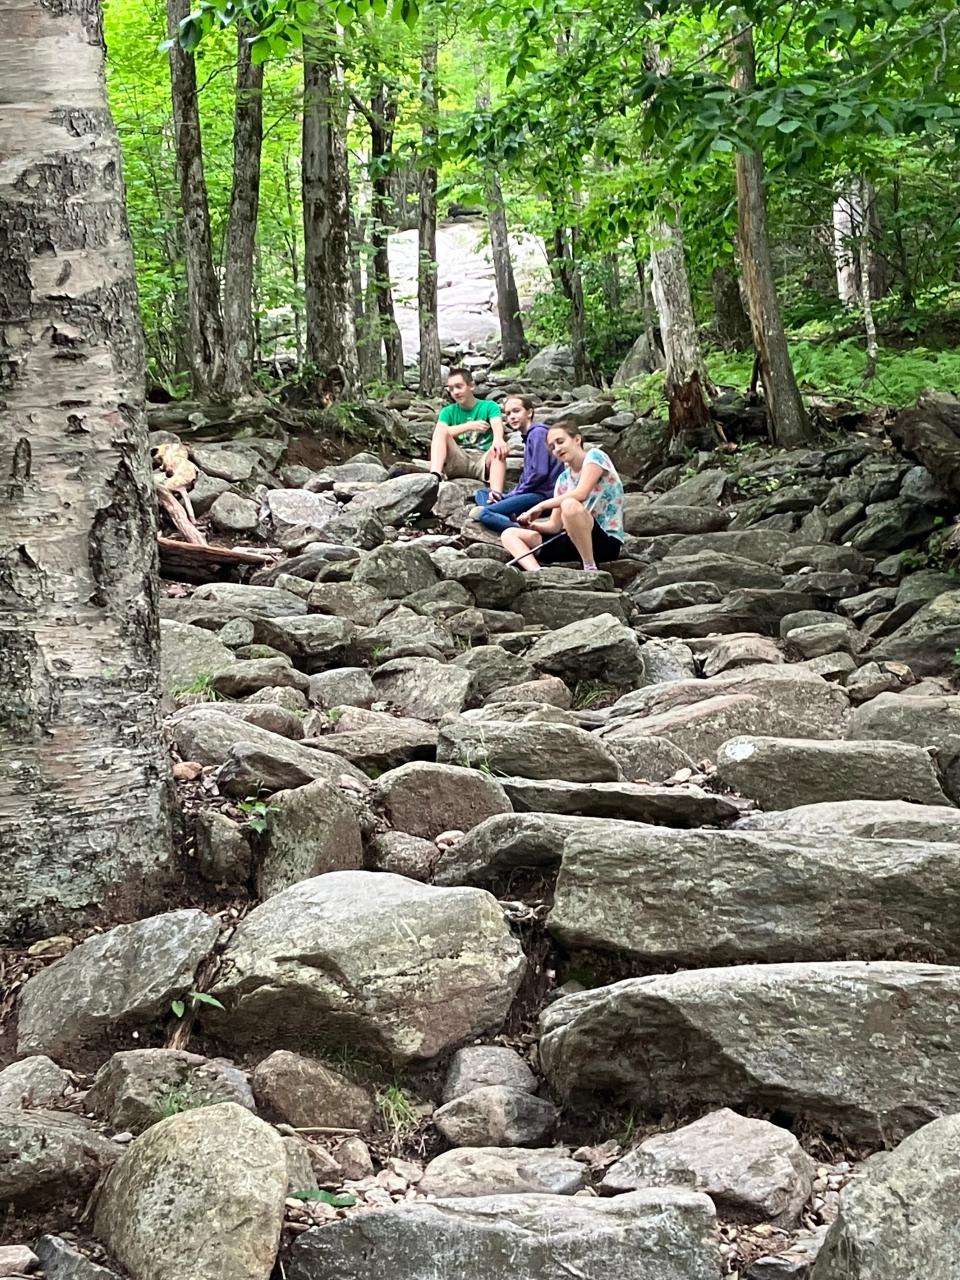 The grandchildren wait on the path for the adults to catch up on the Holden-Kanode family hike up Mount Monadnock outside of Jaffrey, New Hampshire.